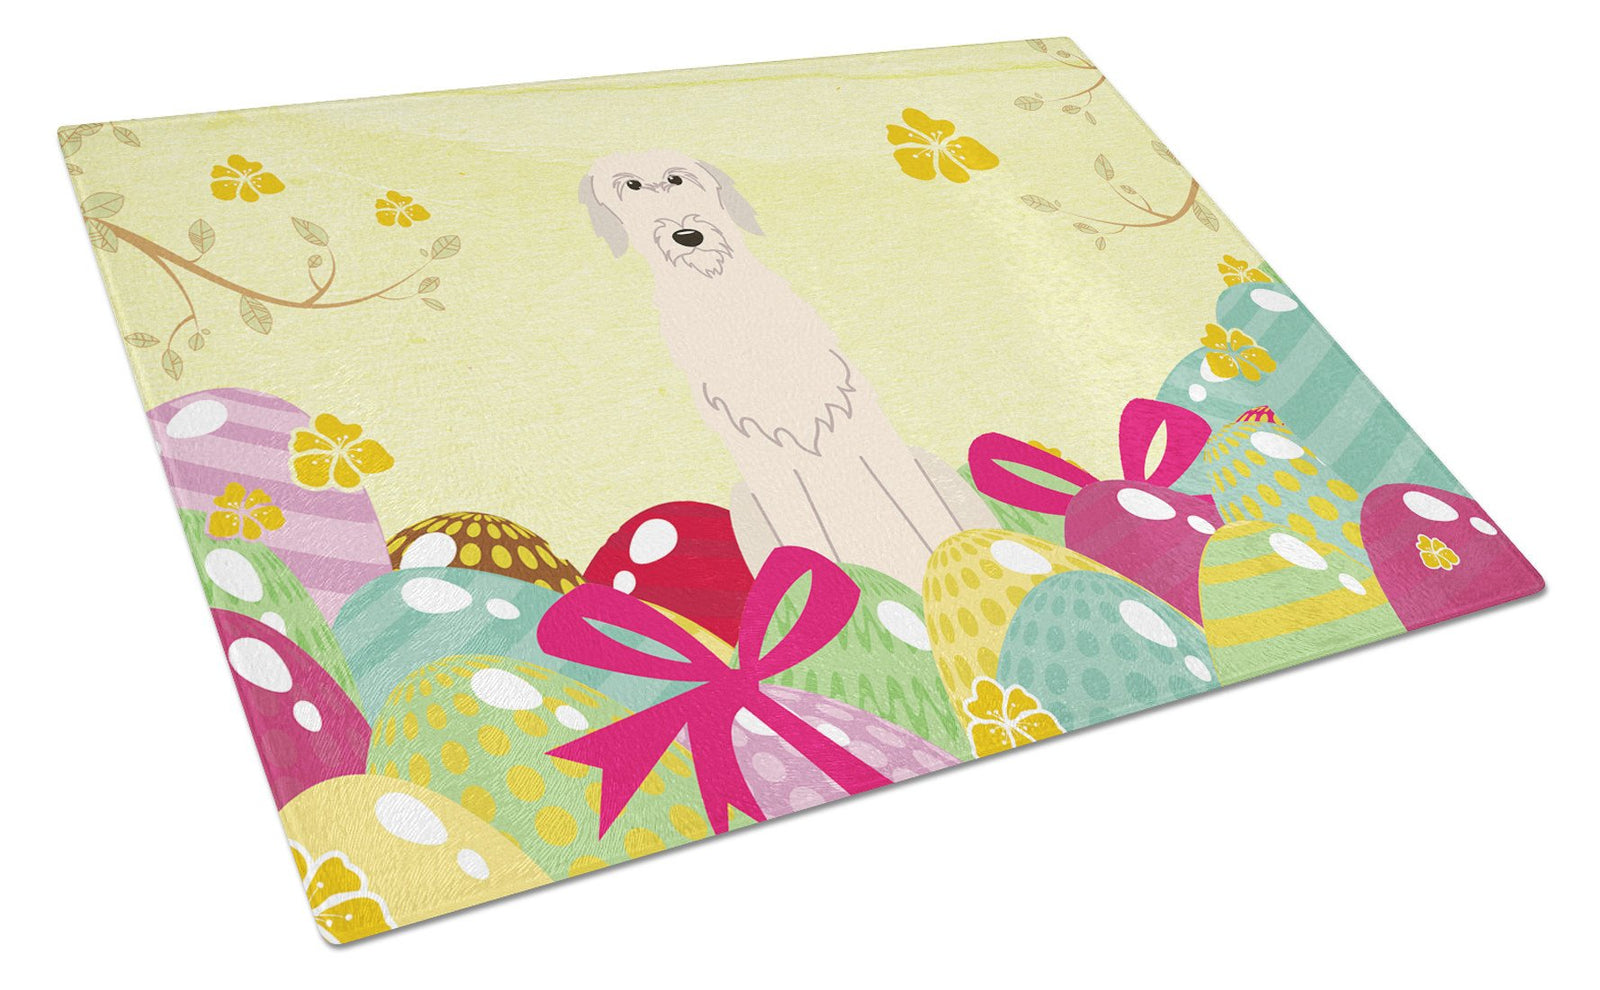 Easter Eggs Irish Wolfhound Glass Cutting Board Large BB6065LCB by Caroline's Treasures